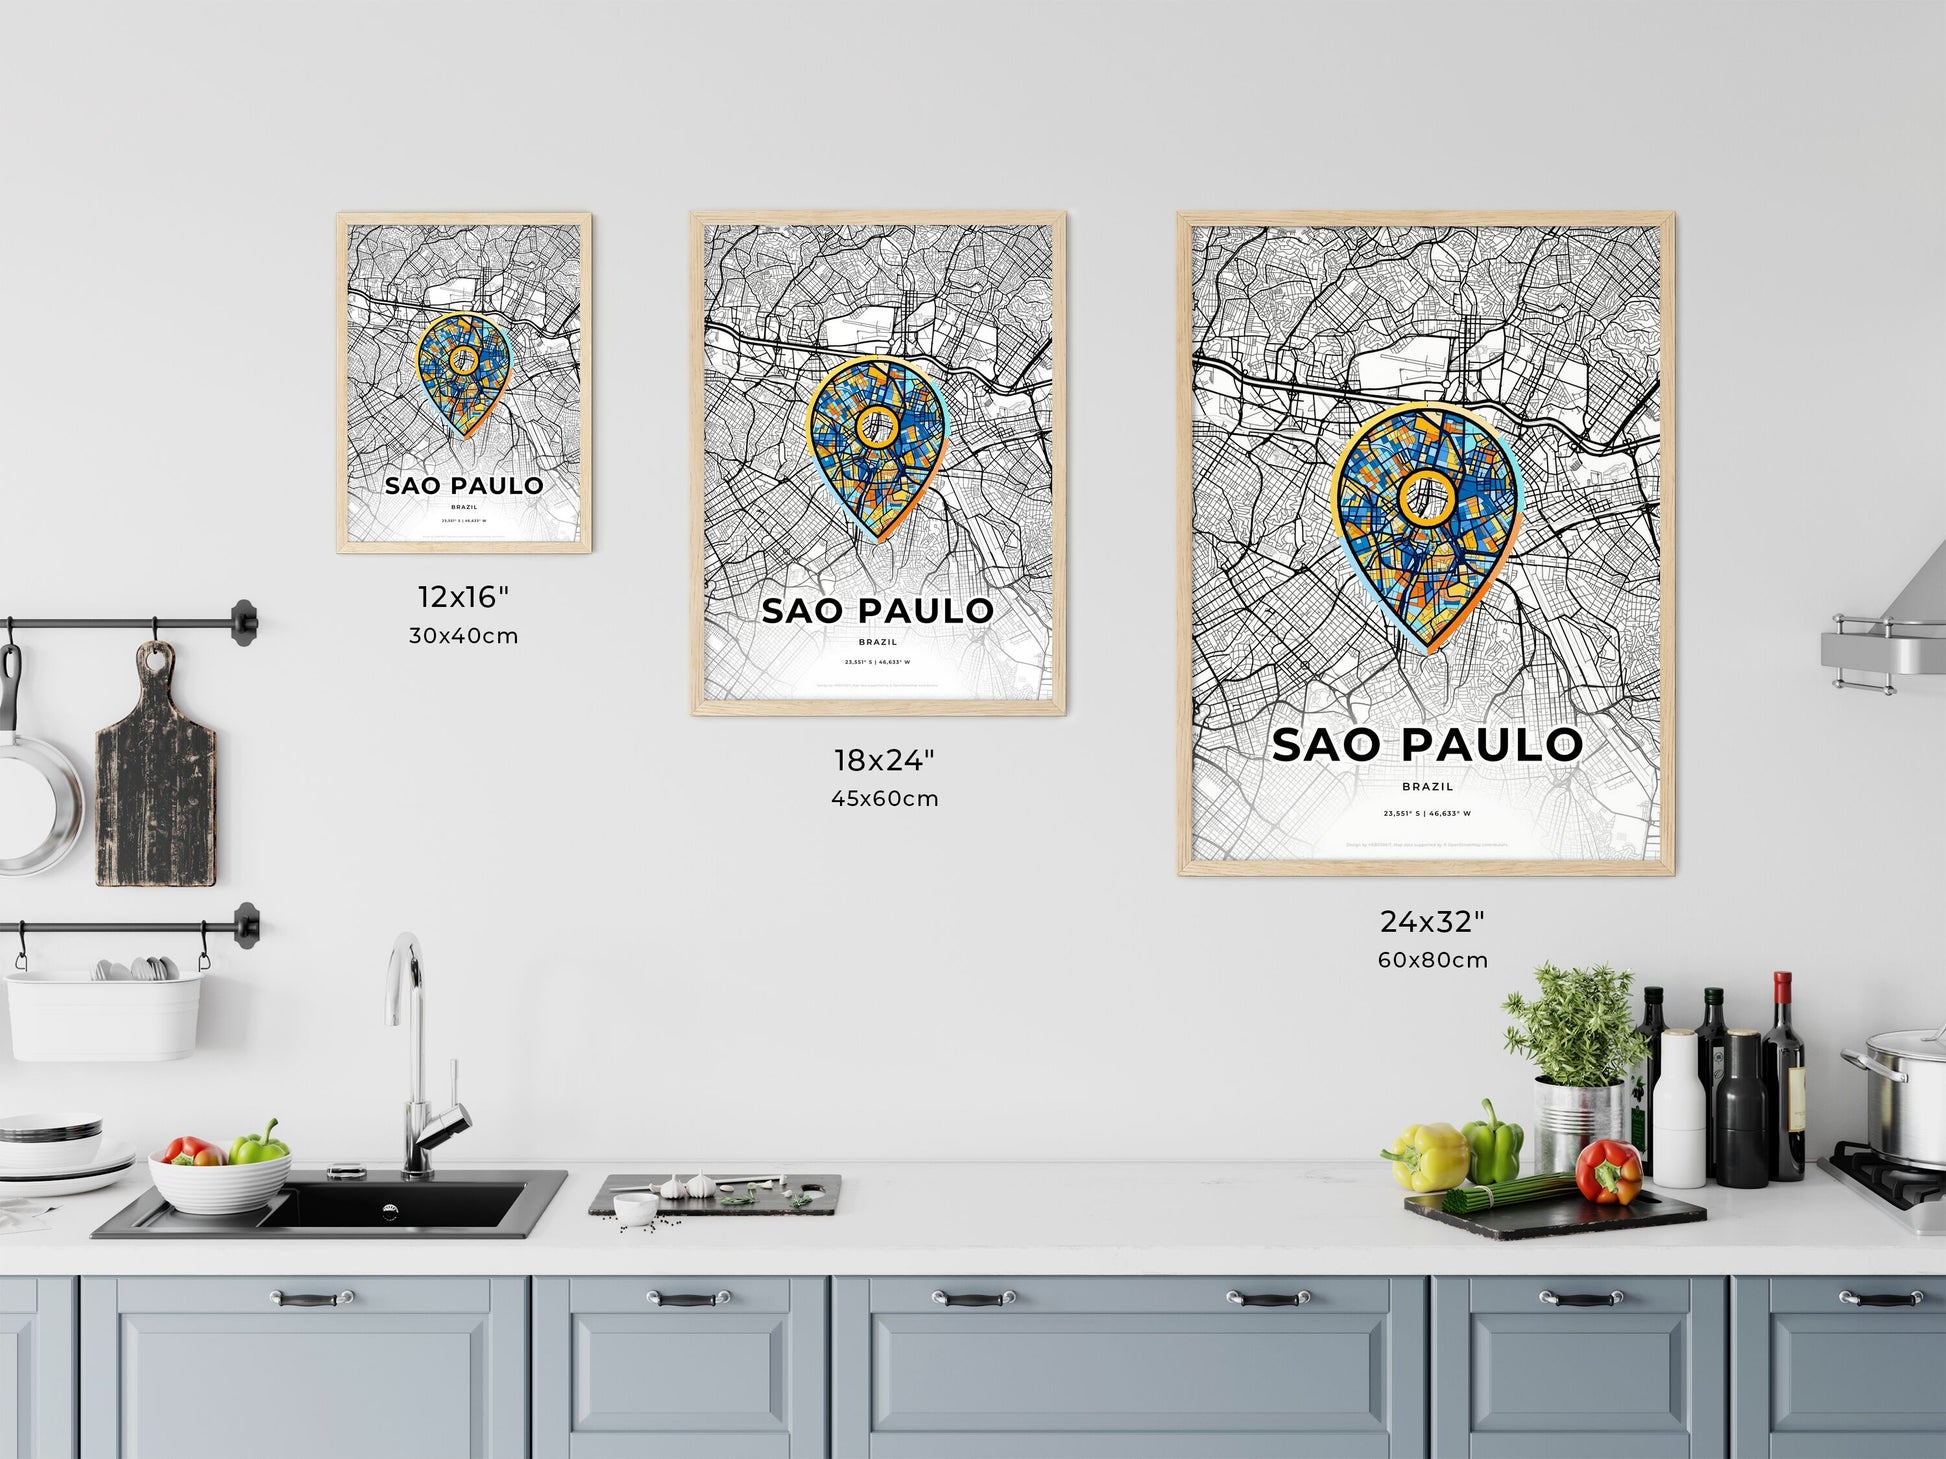 SAO PAULO BRAZIL minimal art map with a colorful icon. Where it all began, Couple map gift.